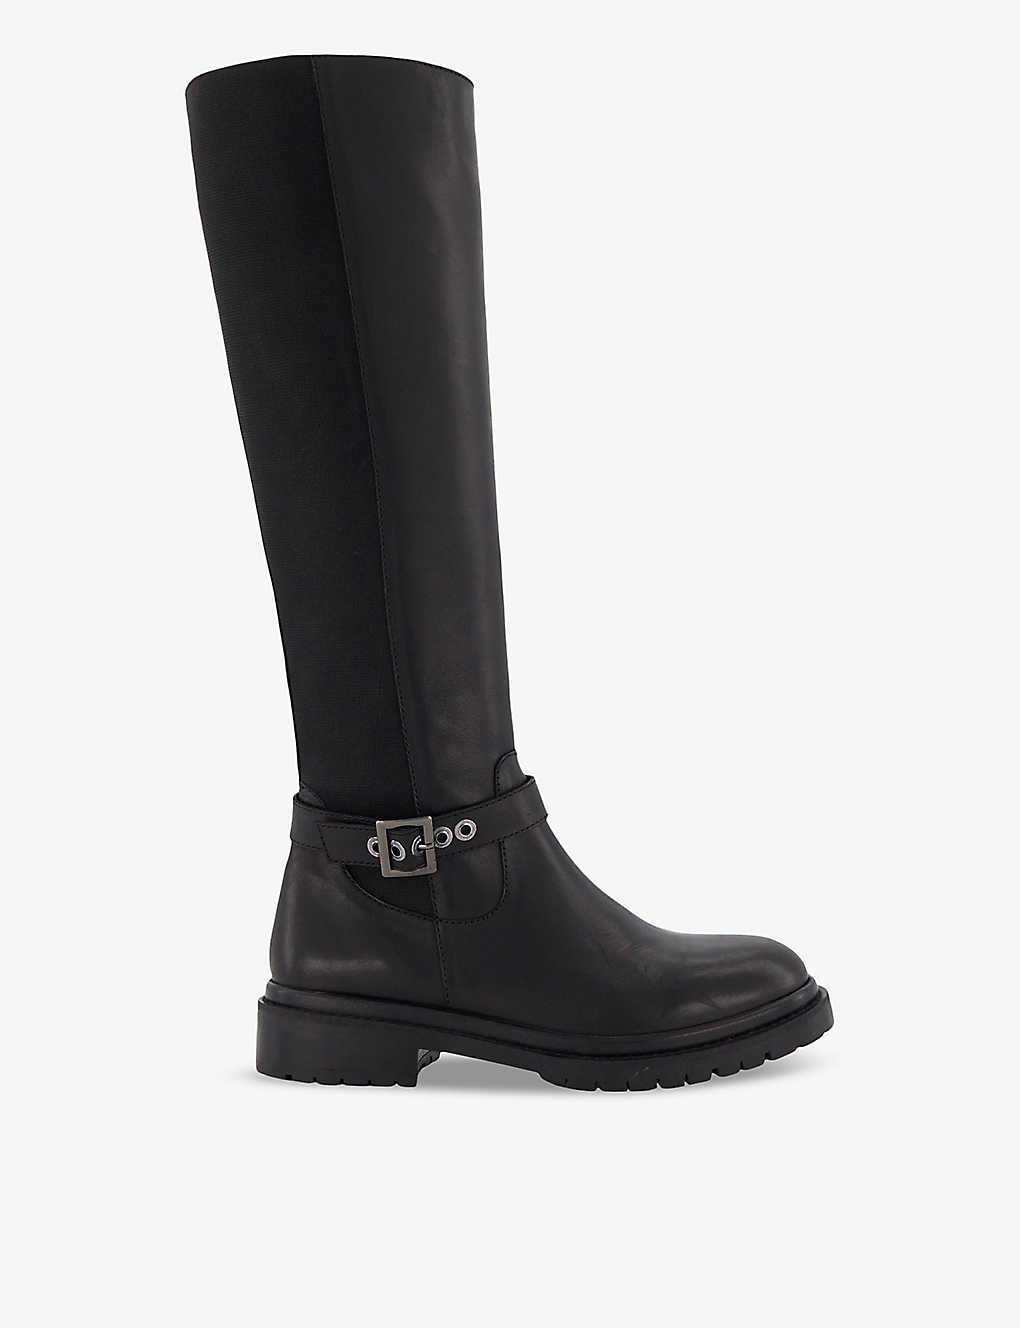 Dune Womens Black-leather Teller Buckle-detail Leather Knee-high Boots